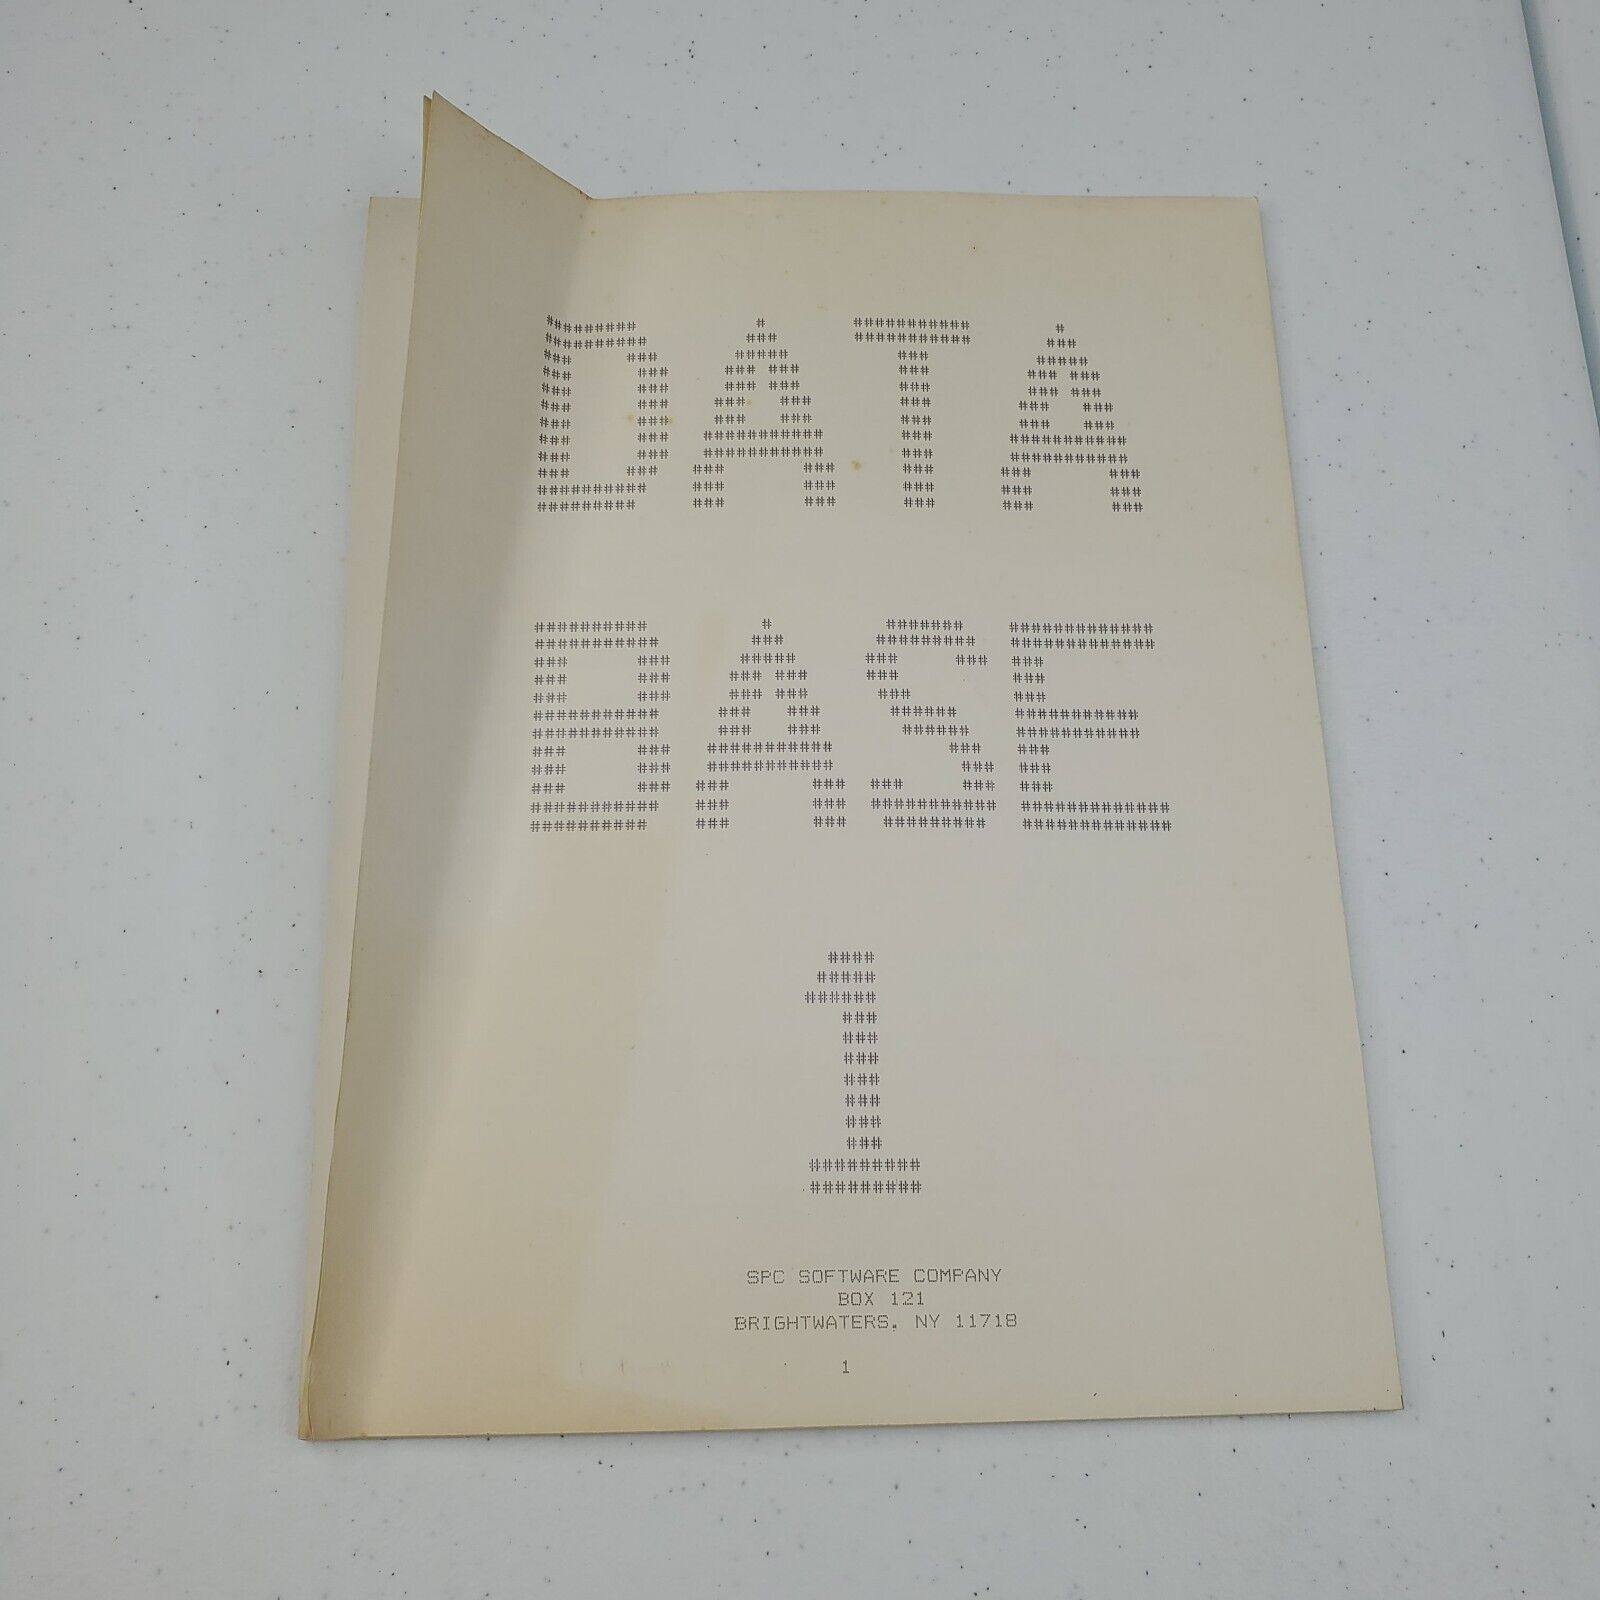 TI-99/4A Data Base 1 Computer Game Manuel Instructions Only Guide SPC Software